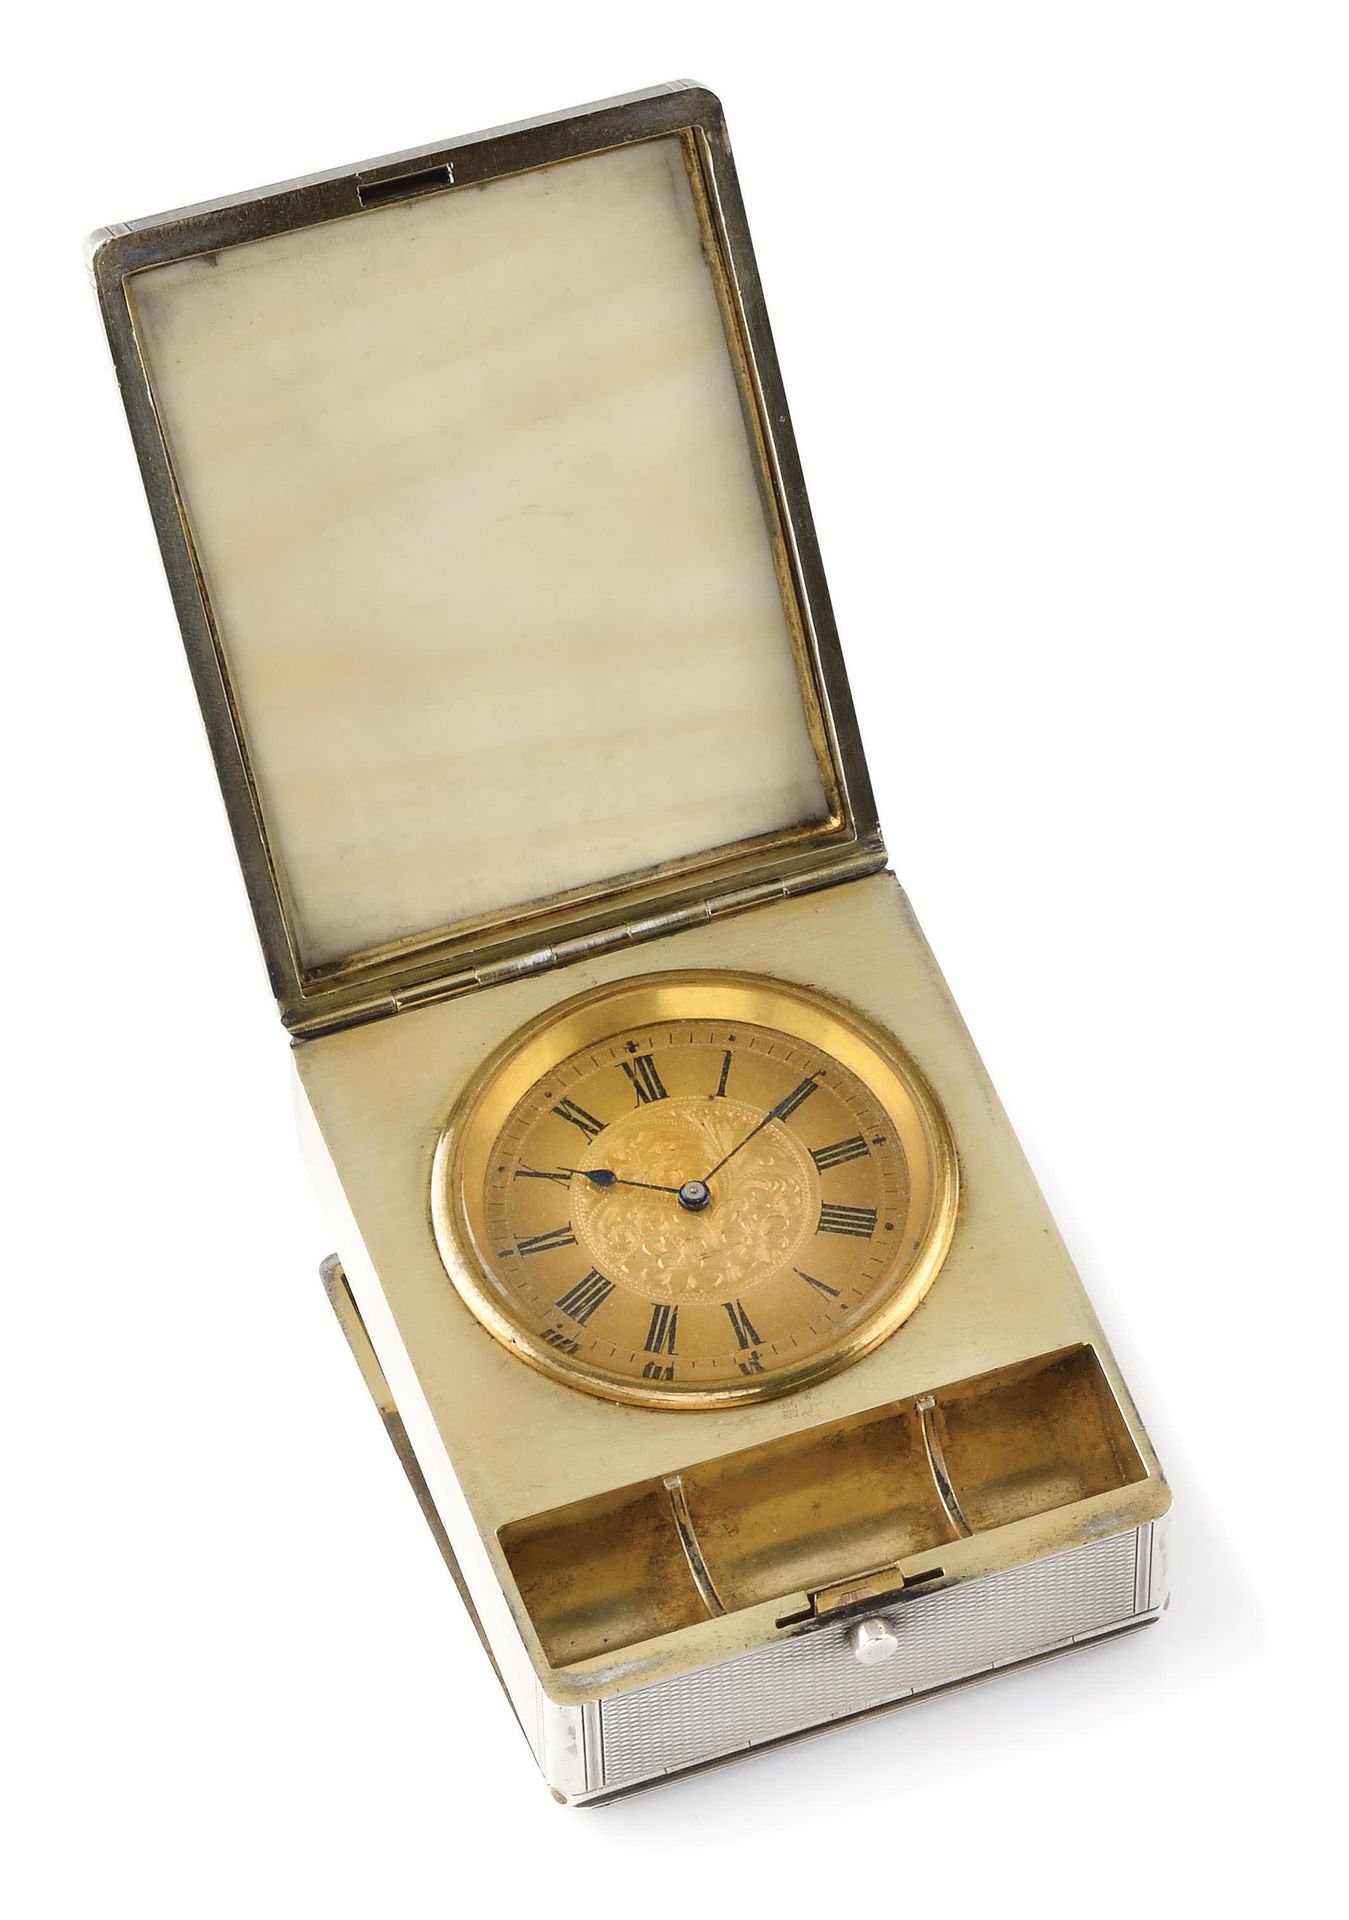 Null BOINTABURET Paris About 1920. Desk clock with coin compartment under the di&hellip;